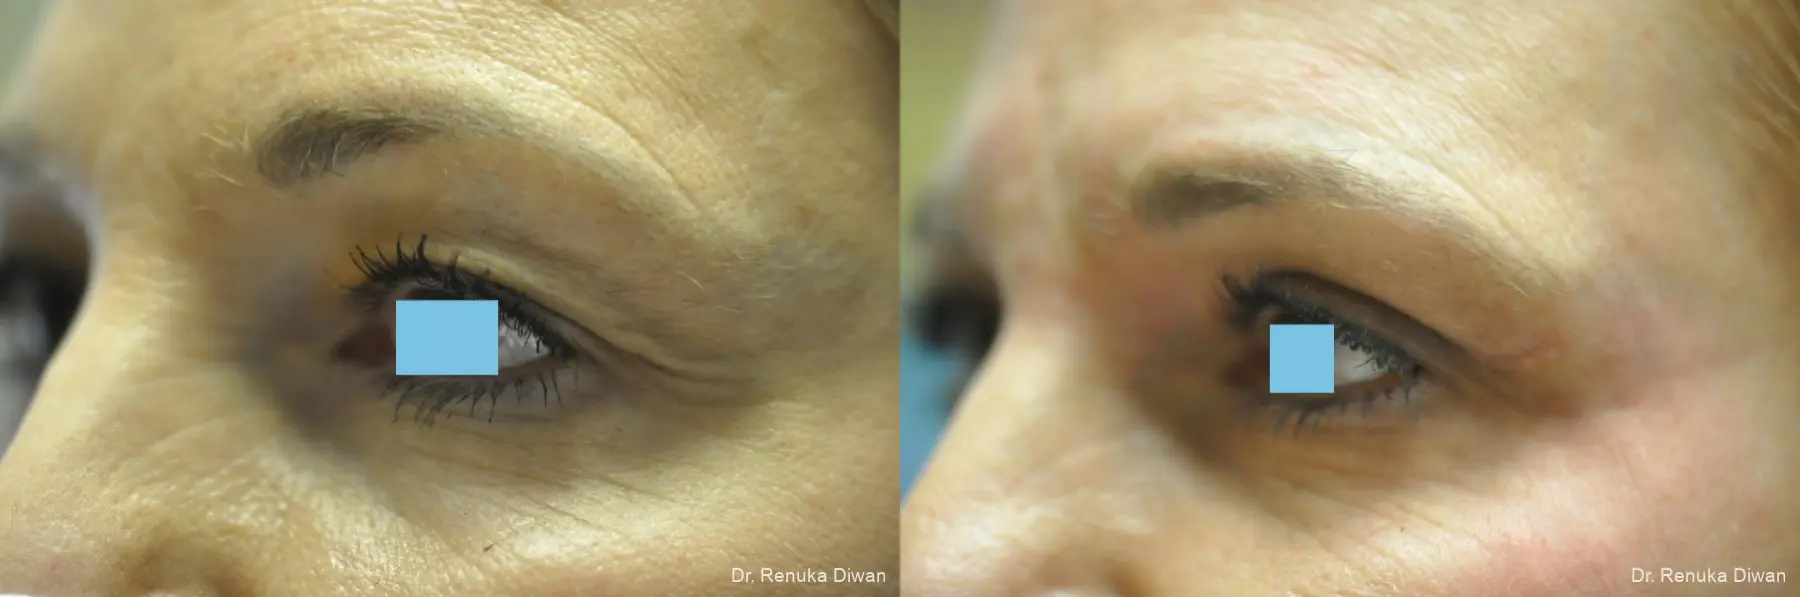 Blepharoplasty: Patient 11 - Before and After 1